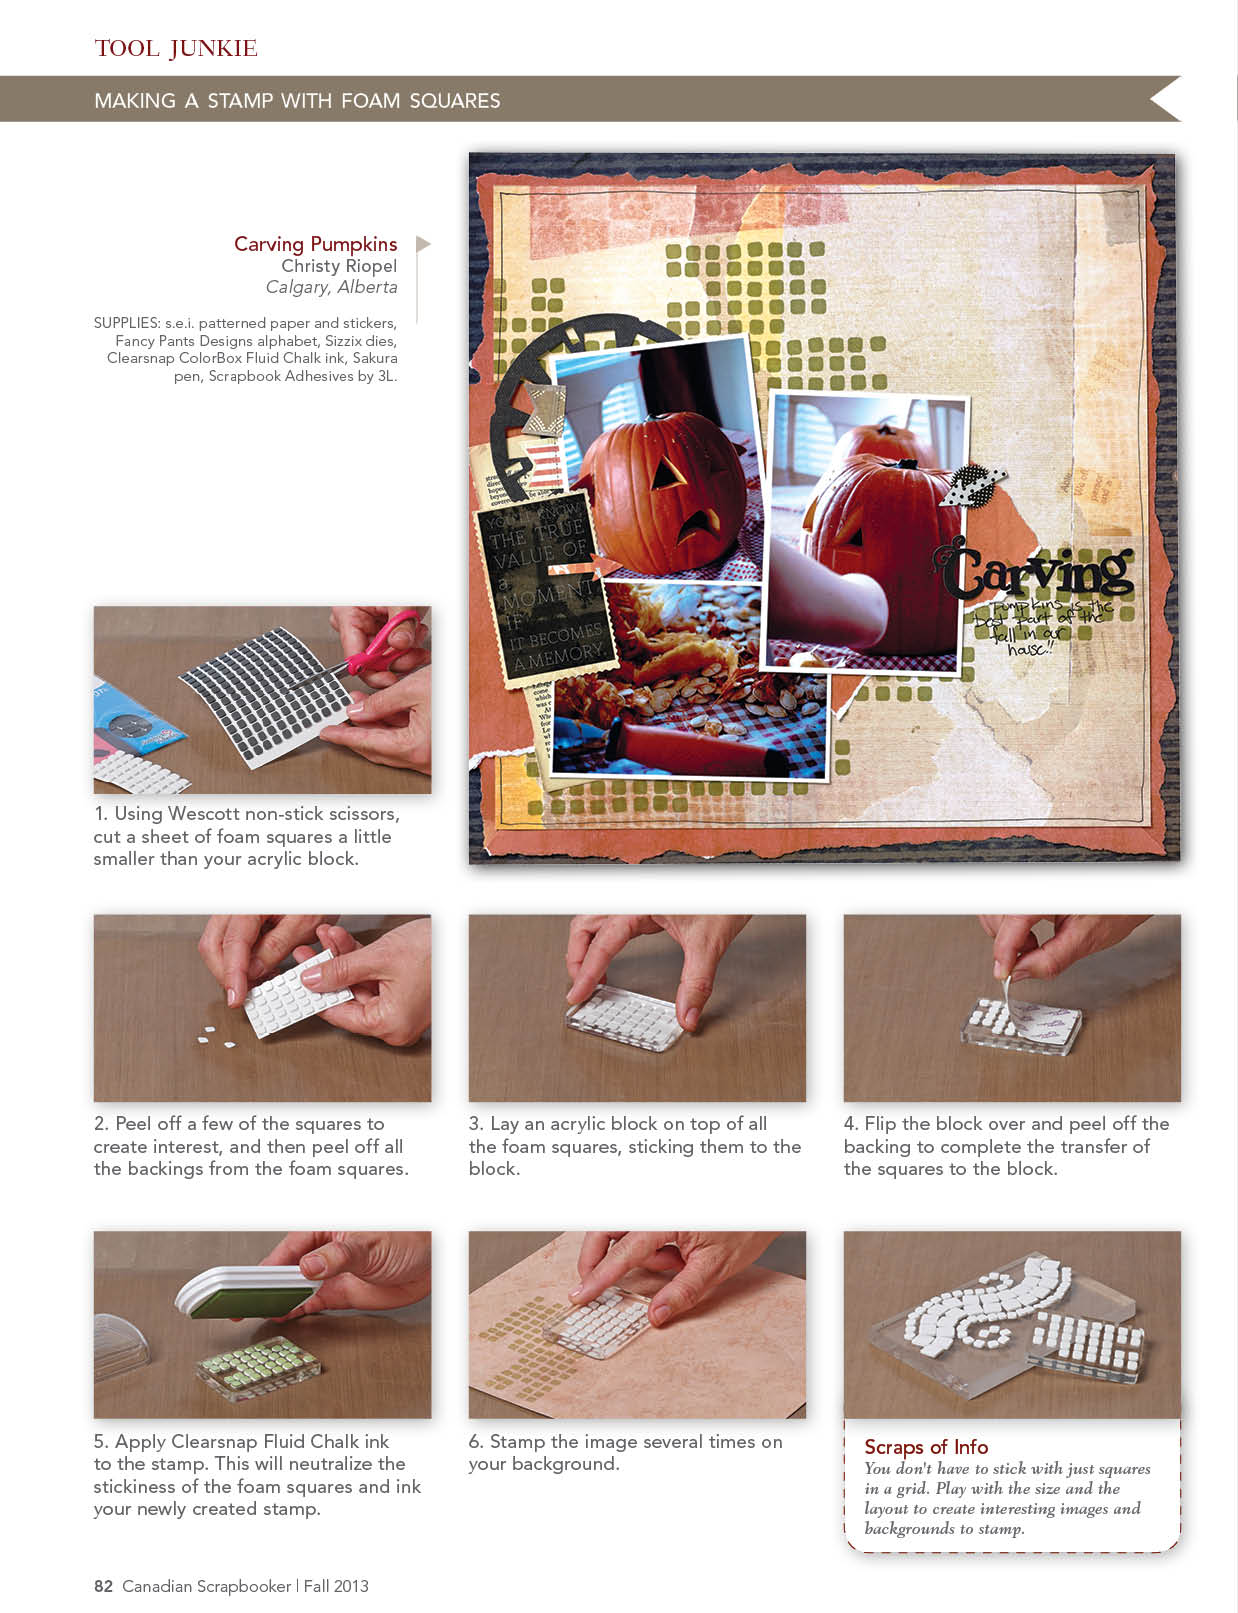 Scrapbooking Layout Designed by Christy Riopel using Scrapbook Adhesives by 3L 3D Foam Squares as stamps